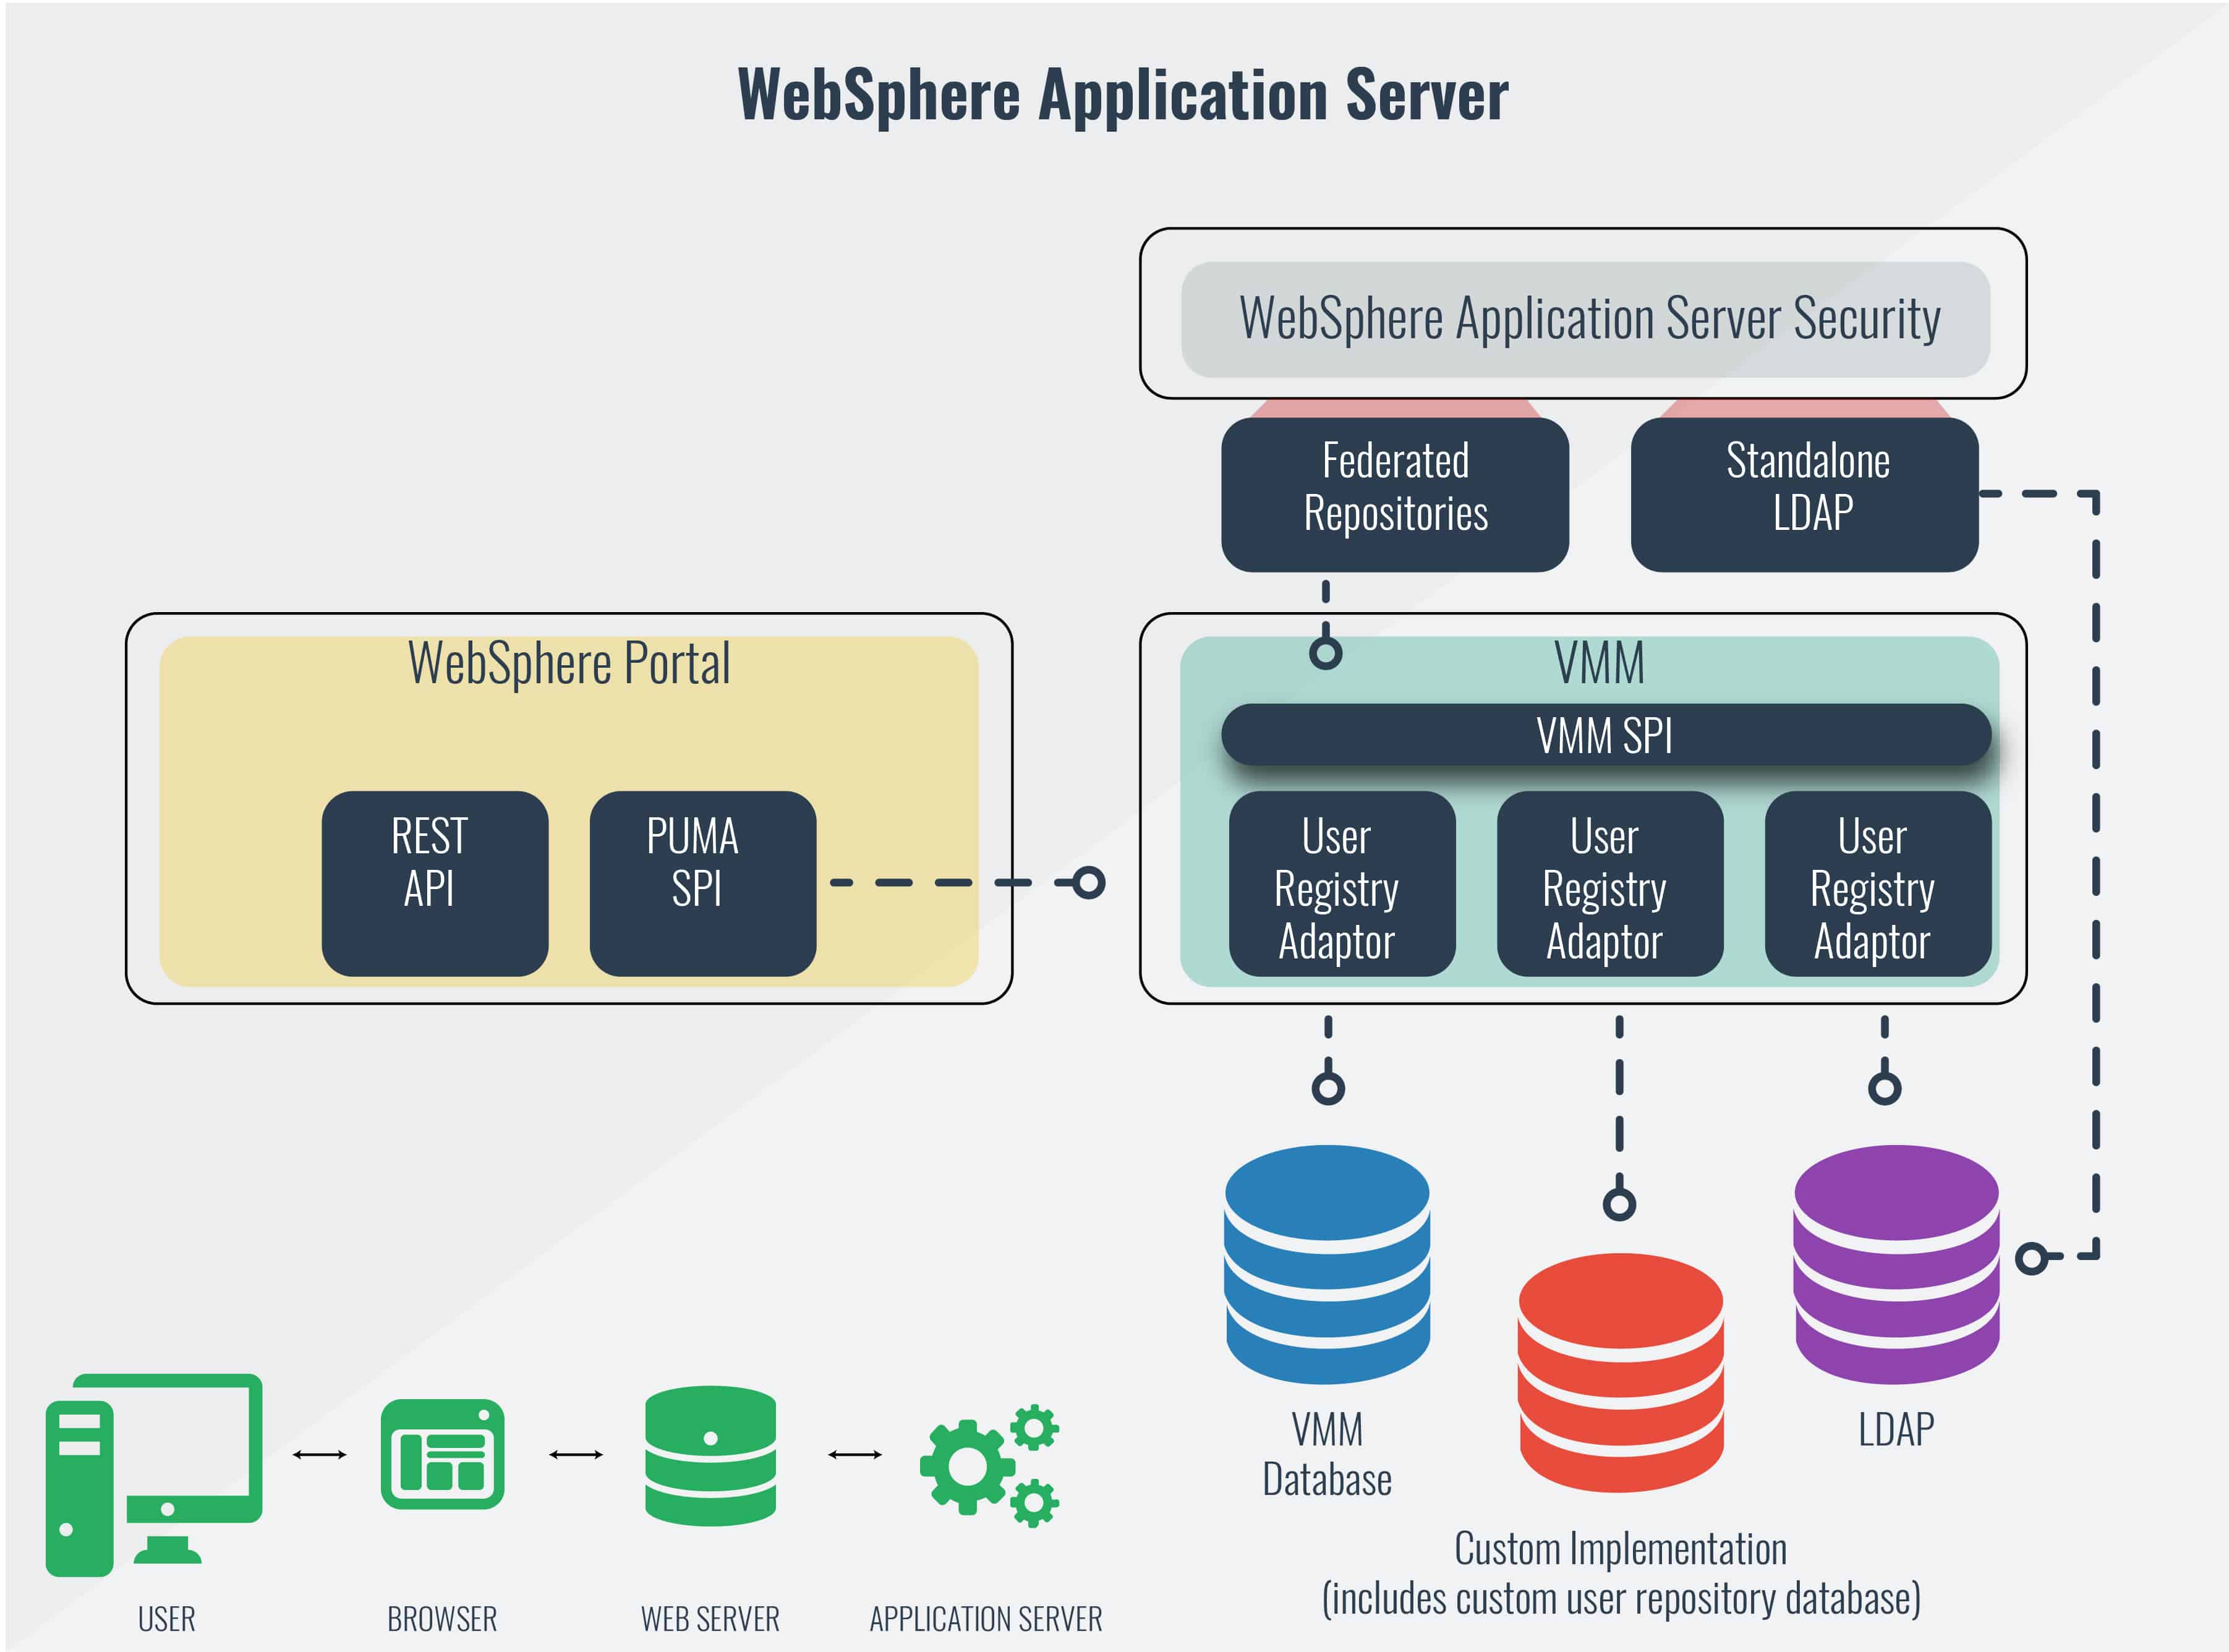 WebSphere Application Server Guide and Instrument Management